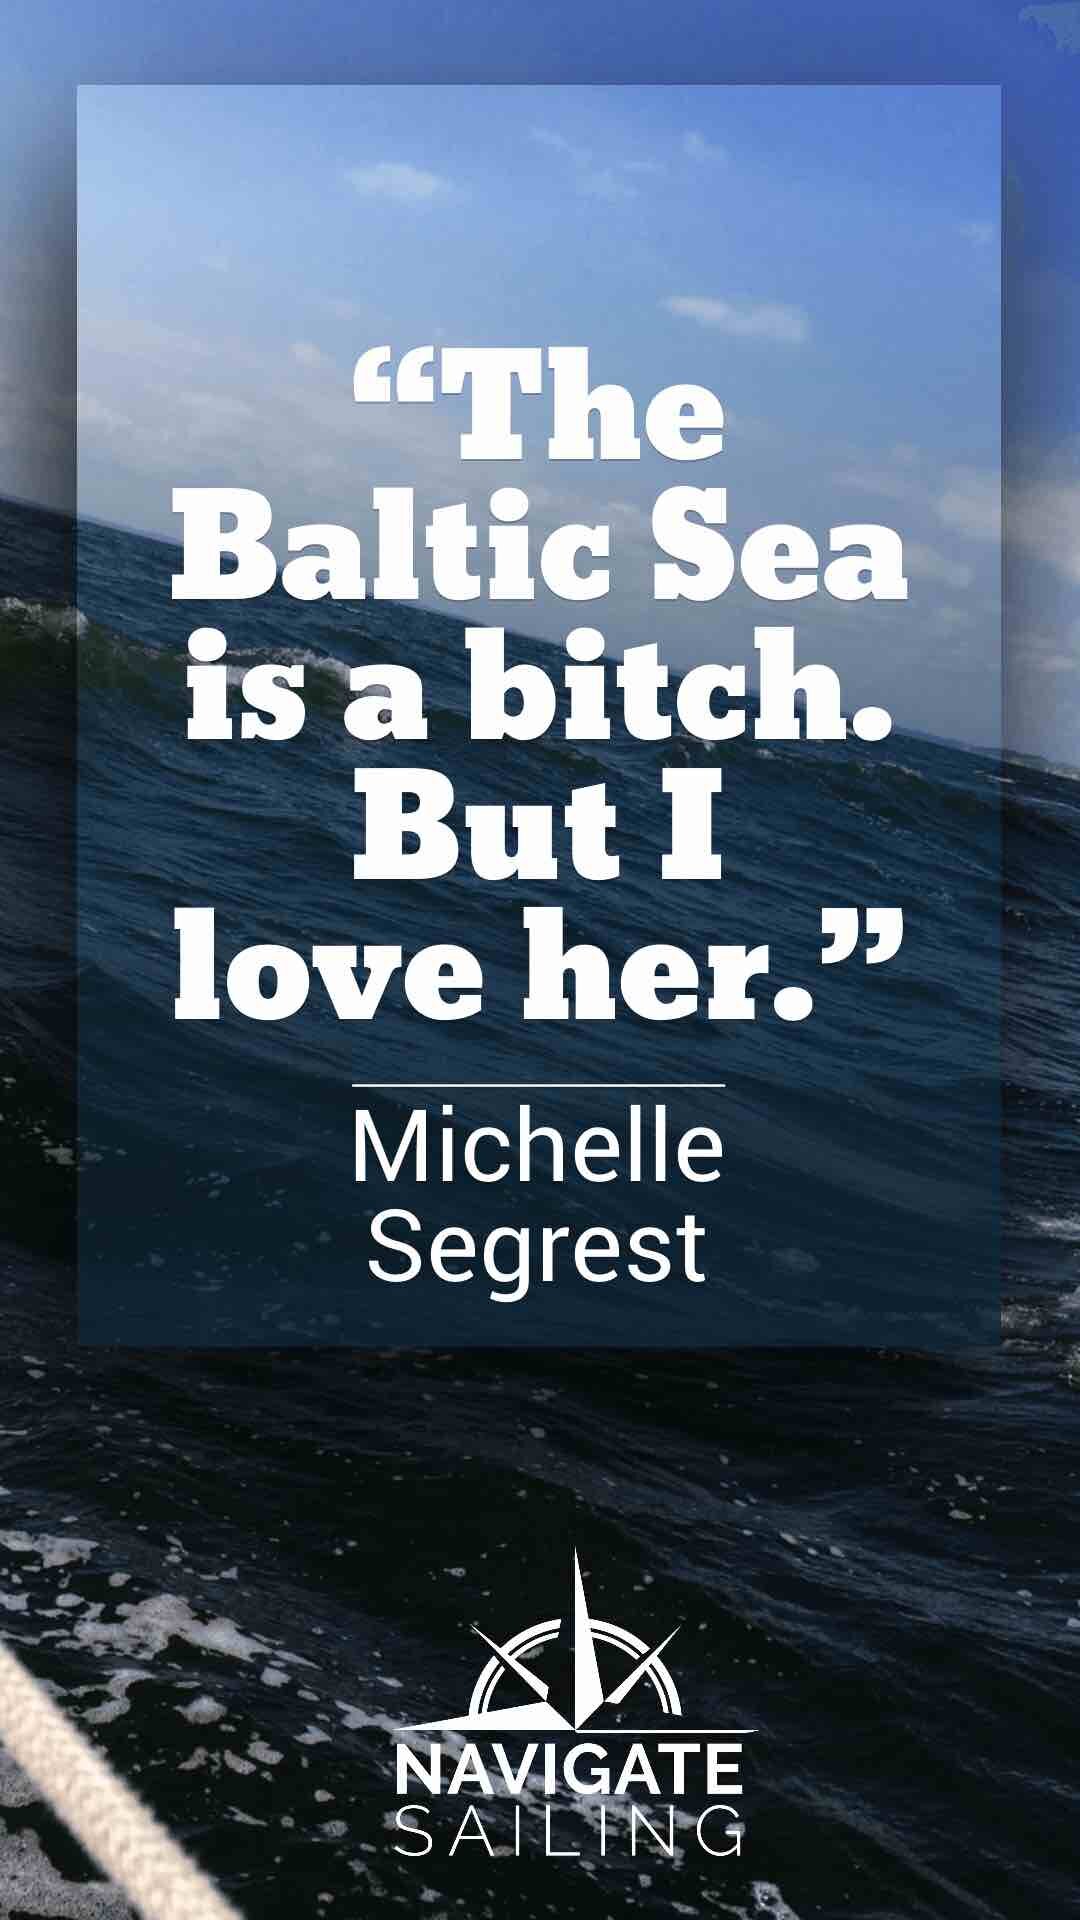 Sailing Inspiration about the Baltic Sea